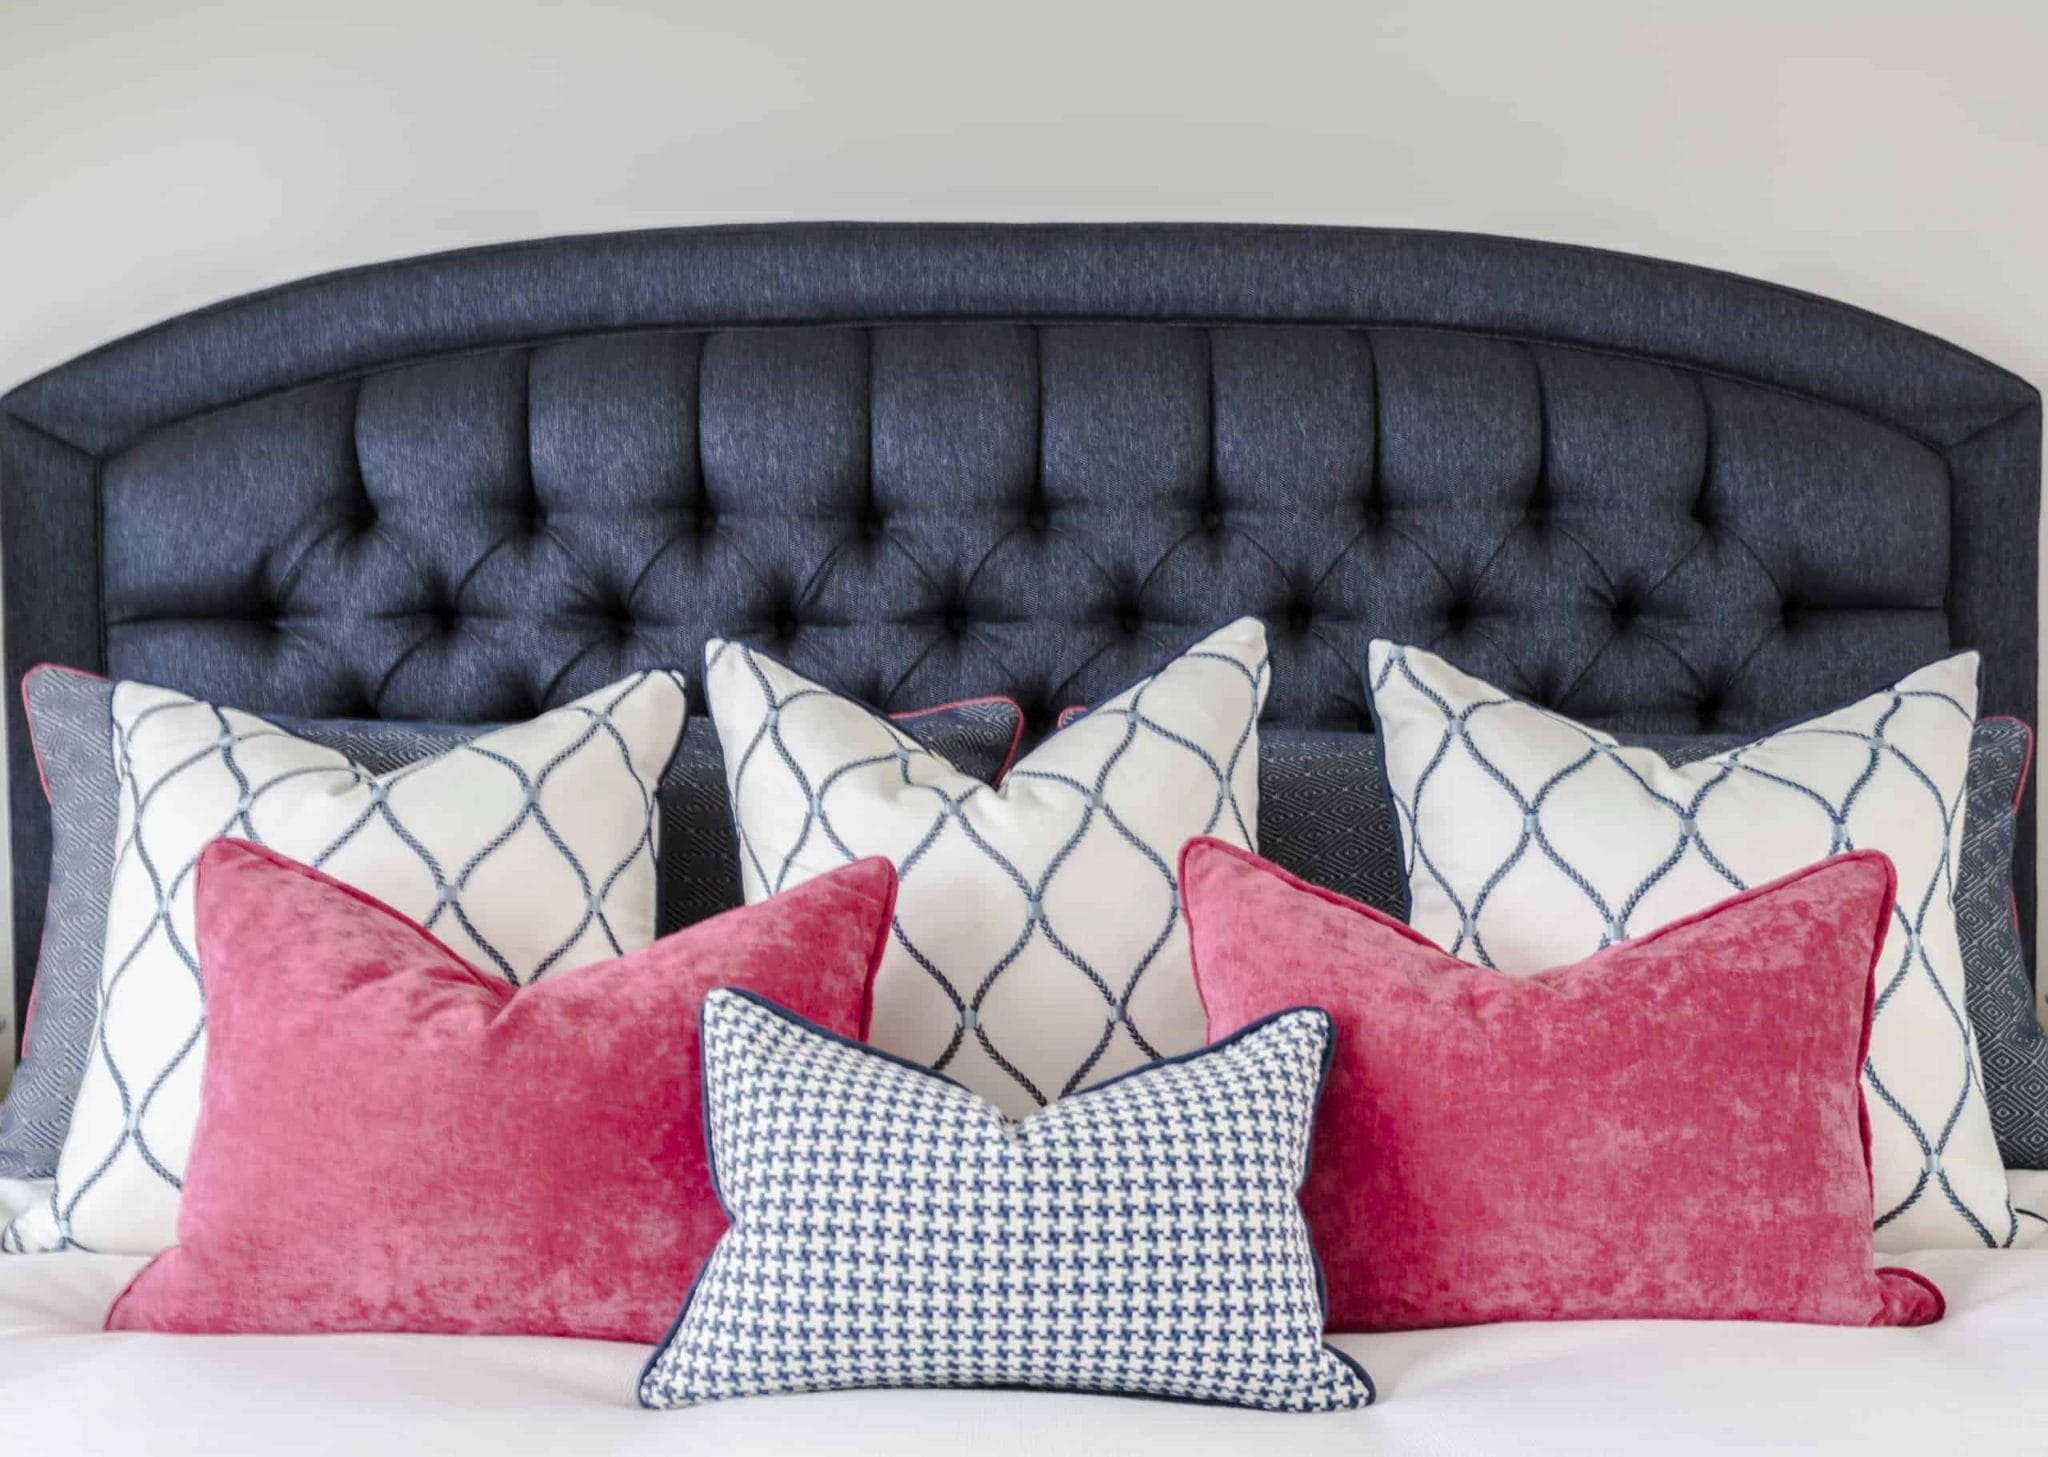 Array of pillows with a blue headboard